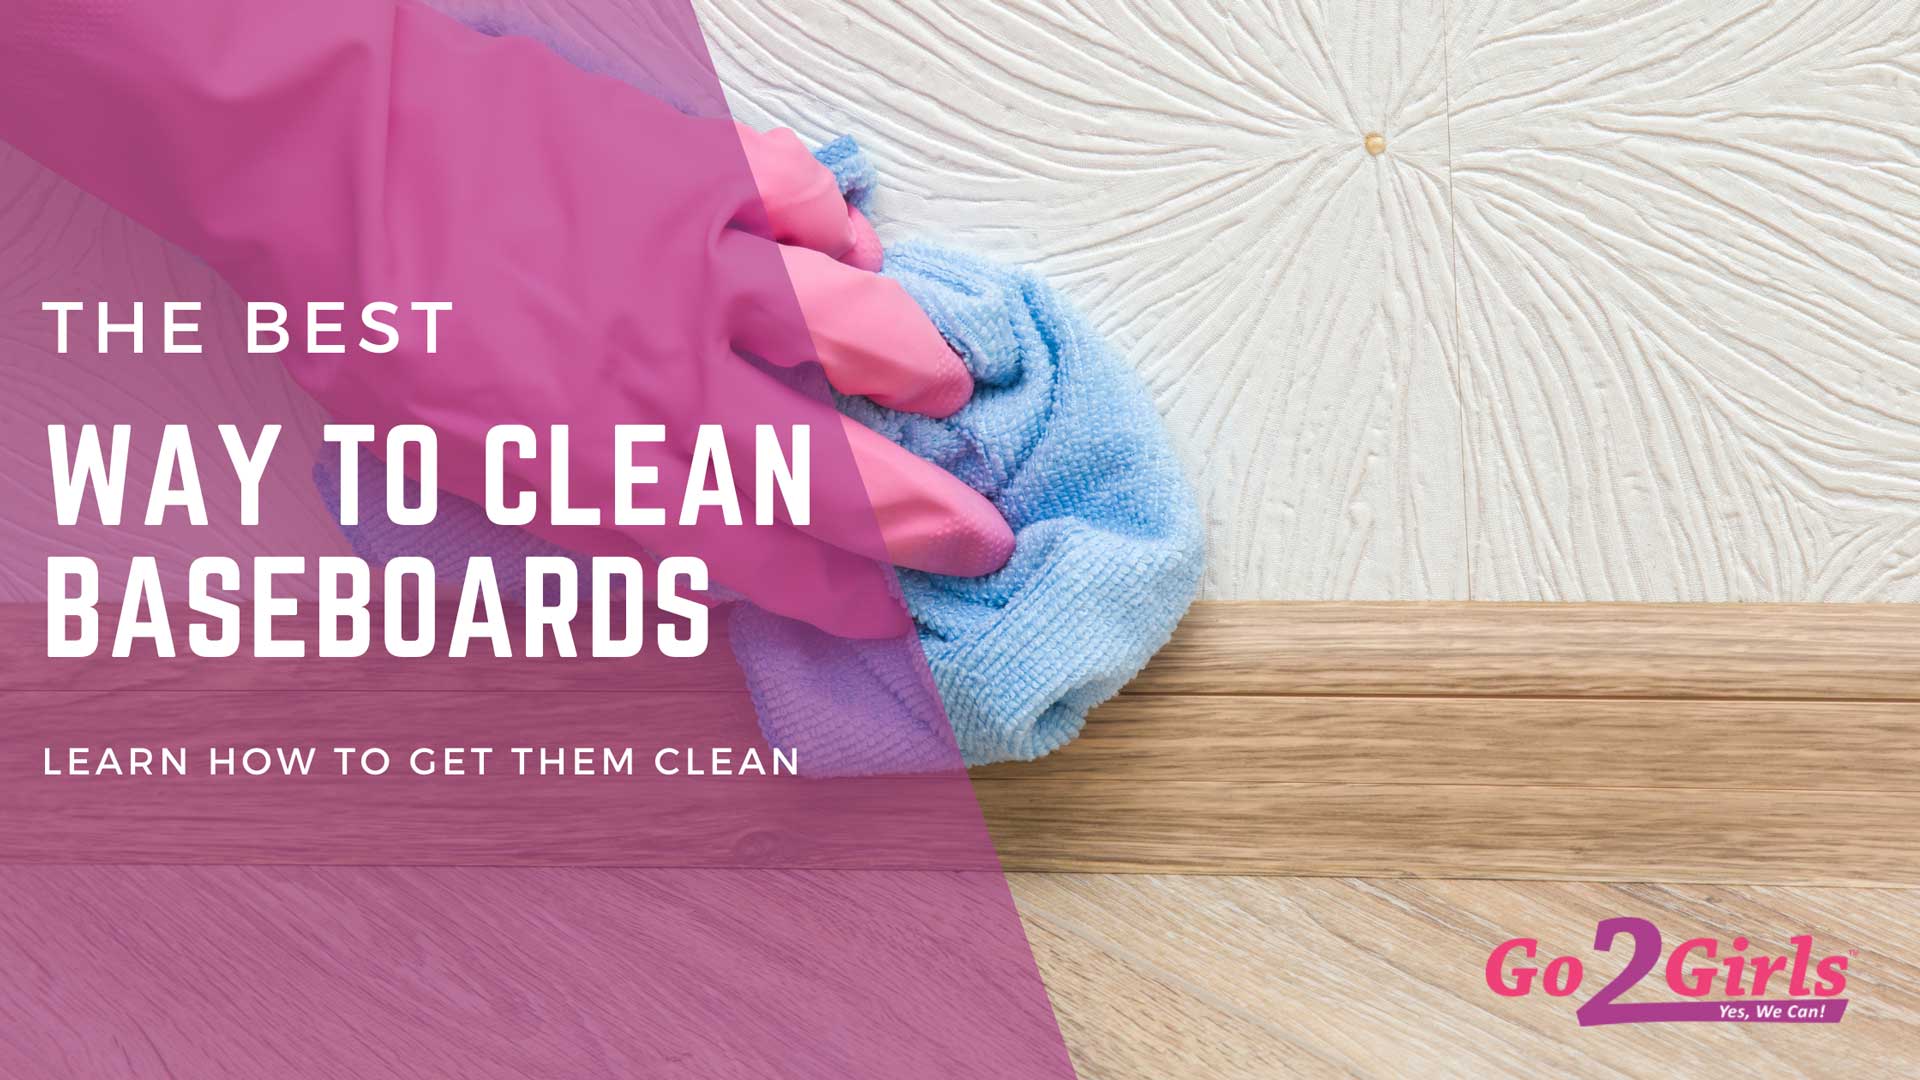 The Best Way to Clean Baseboards